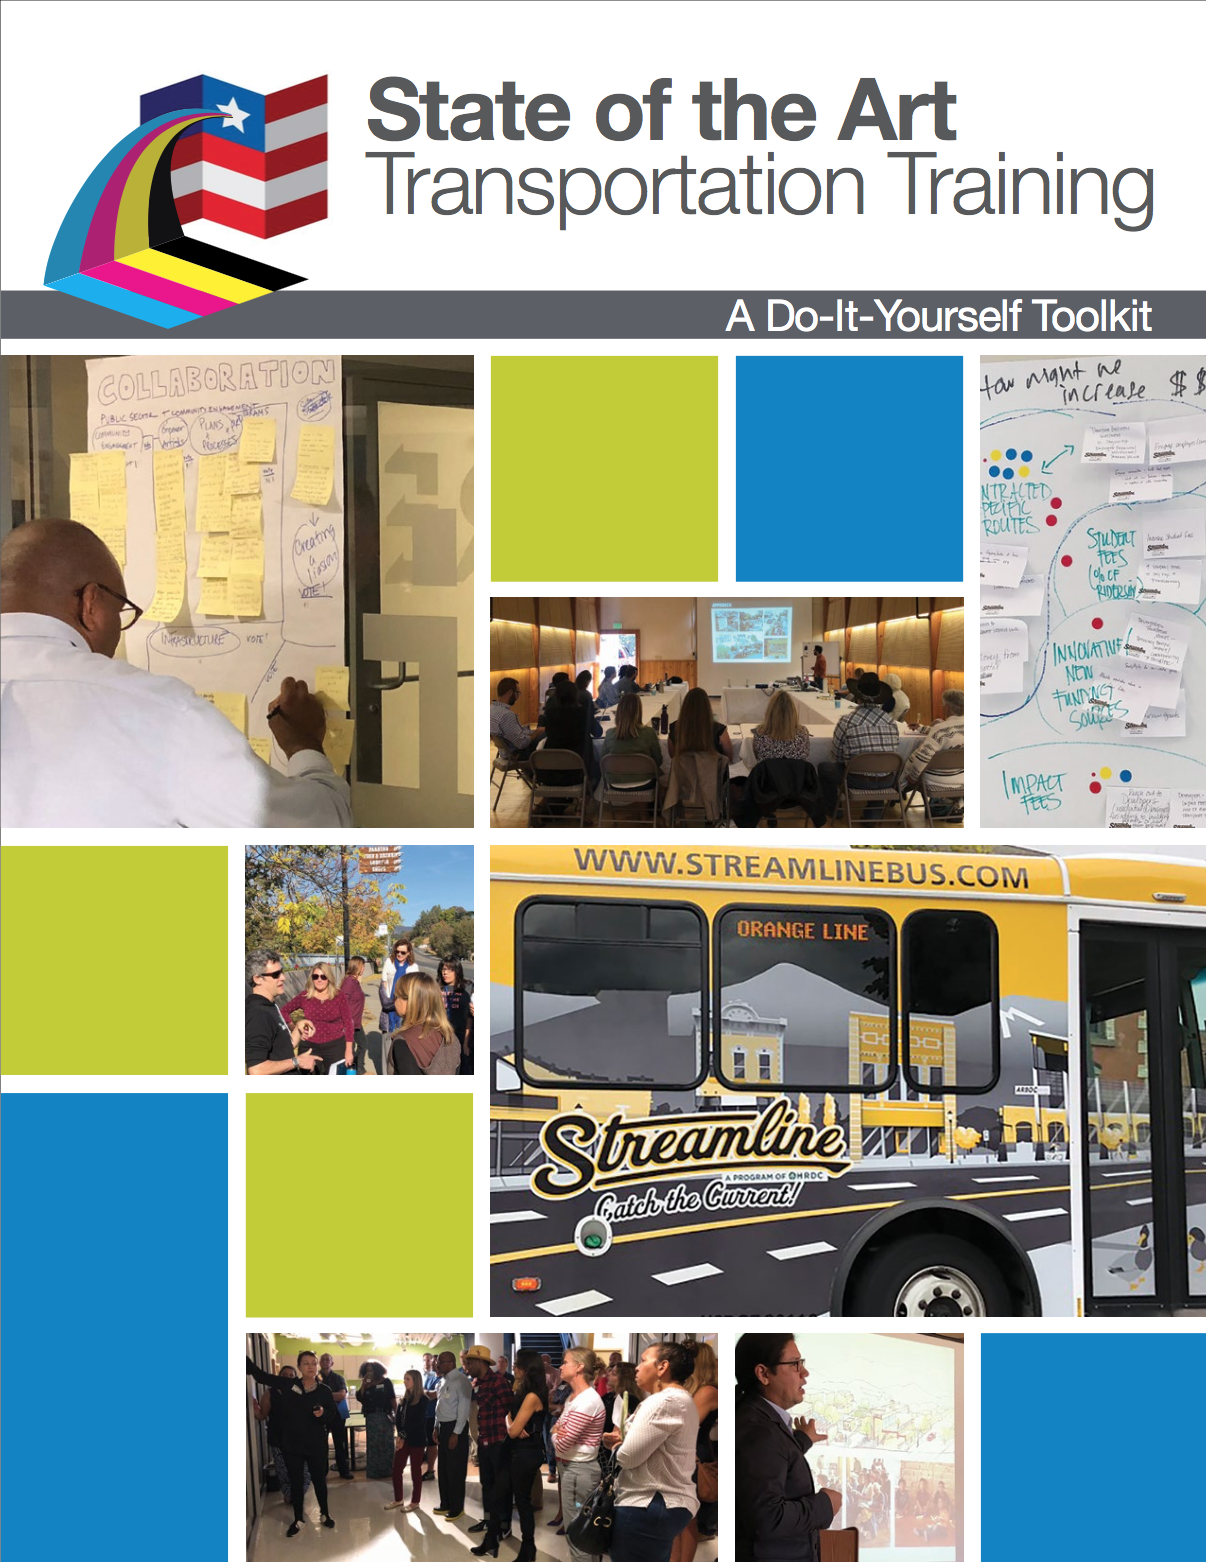 State of the Art Transportation Training Do-It-Yourself Toolkit